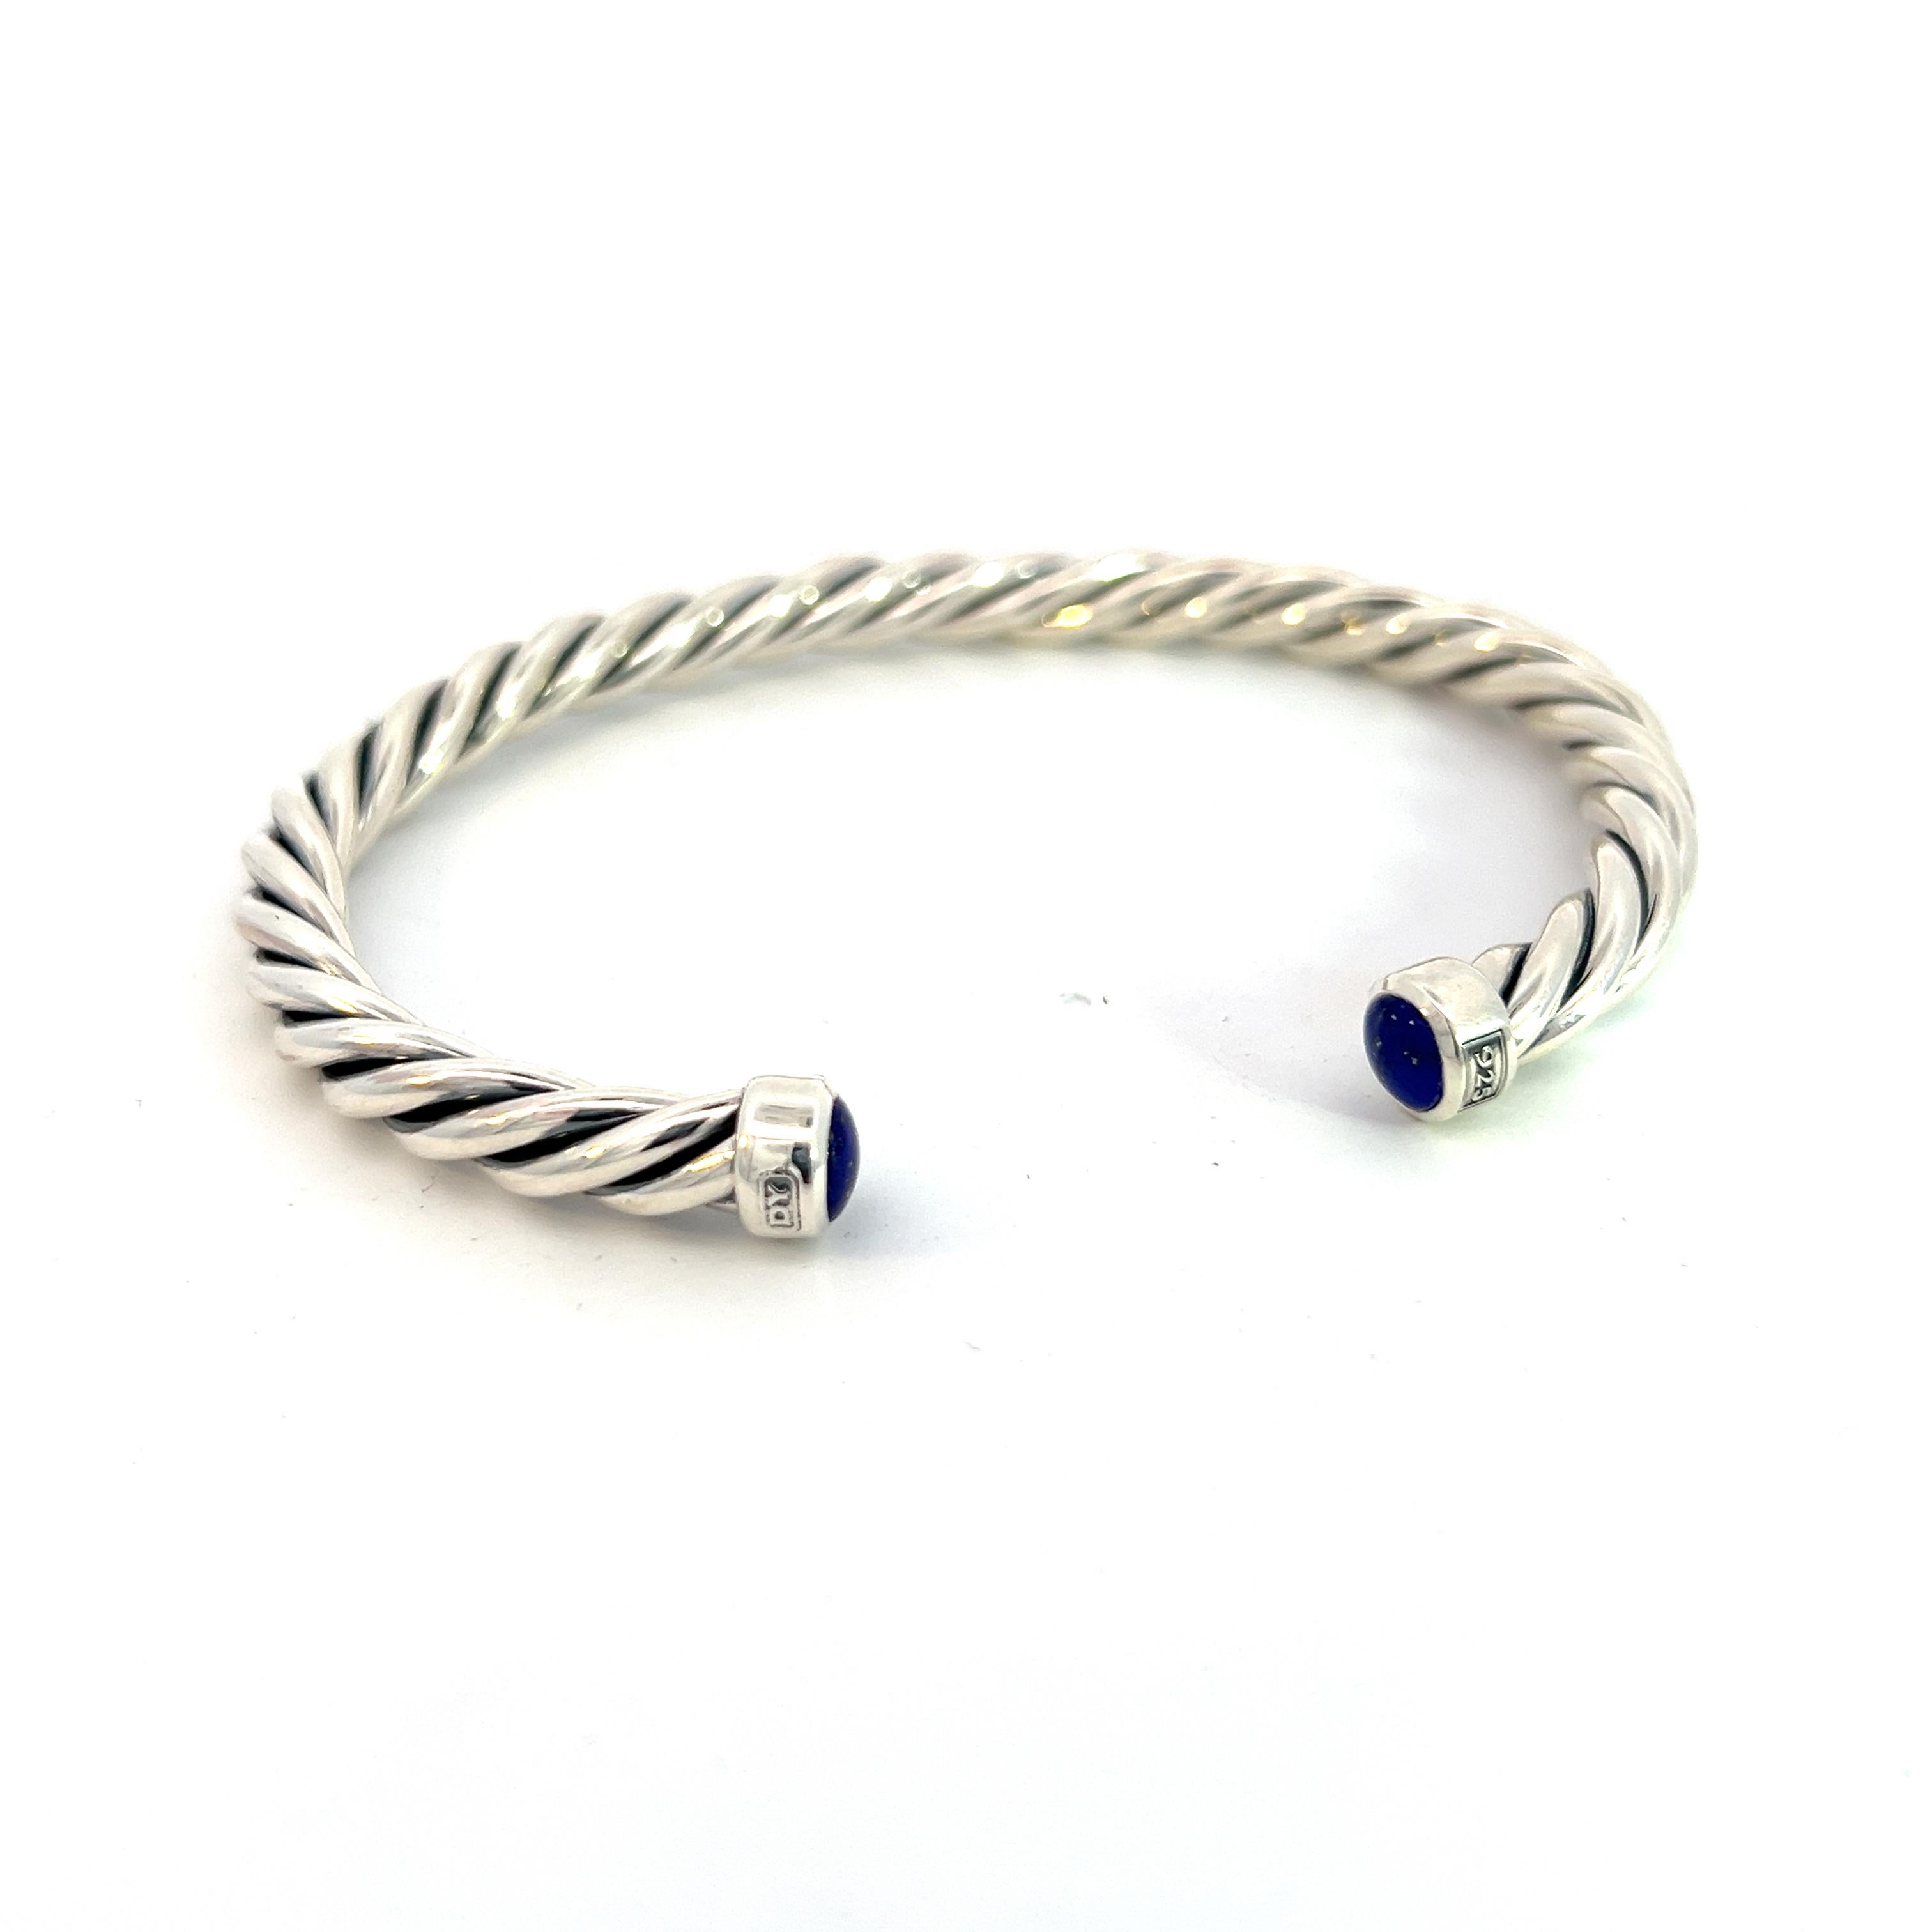 Authentic David Yurman Estate Lapiz Lazuli Mens Cable Cuff Bracelet Silver 8 inch cuff 6 mm DY343

Retail: $999.00

This elegant Authentic David Yurman bracelet is made of sterling silver.

TRUSTED SELLER SINCE 2002

PLEASE SEE OUR HUNDREDS OF